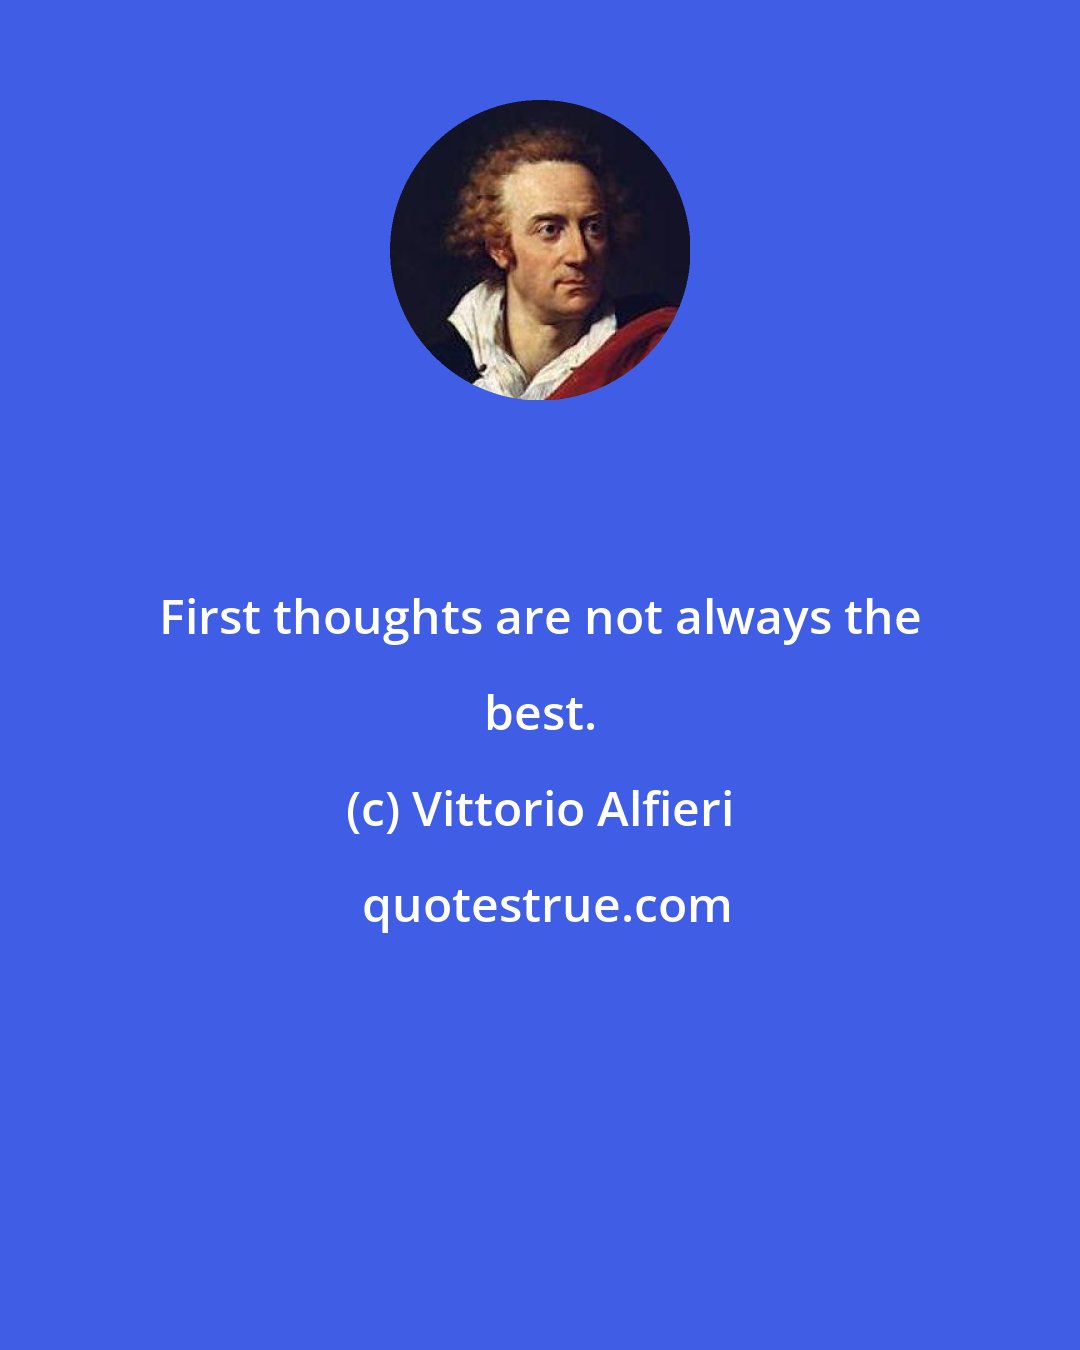 Vittorio Alfieri: First thoughts are not always the best.